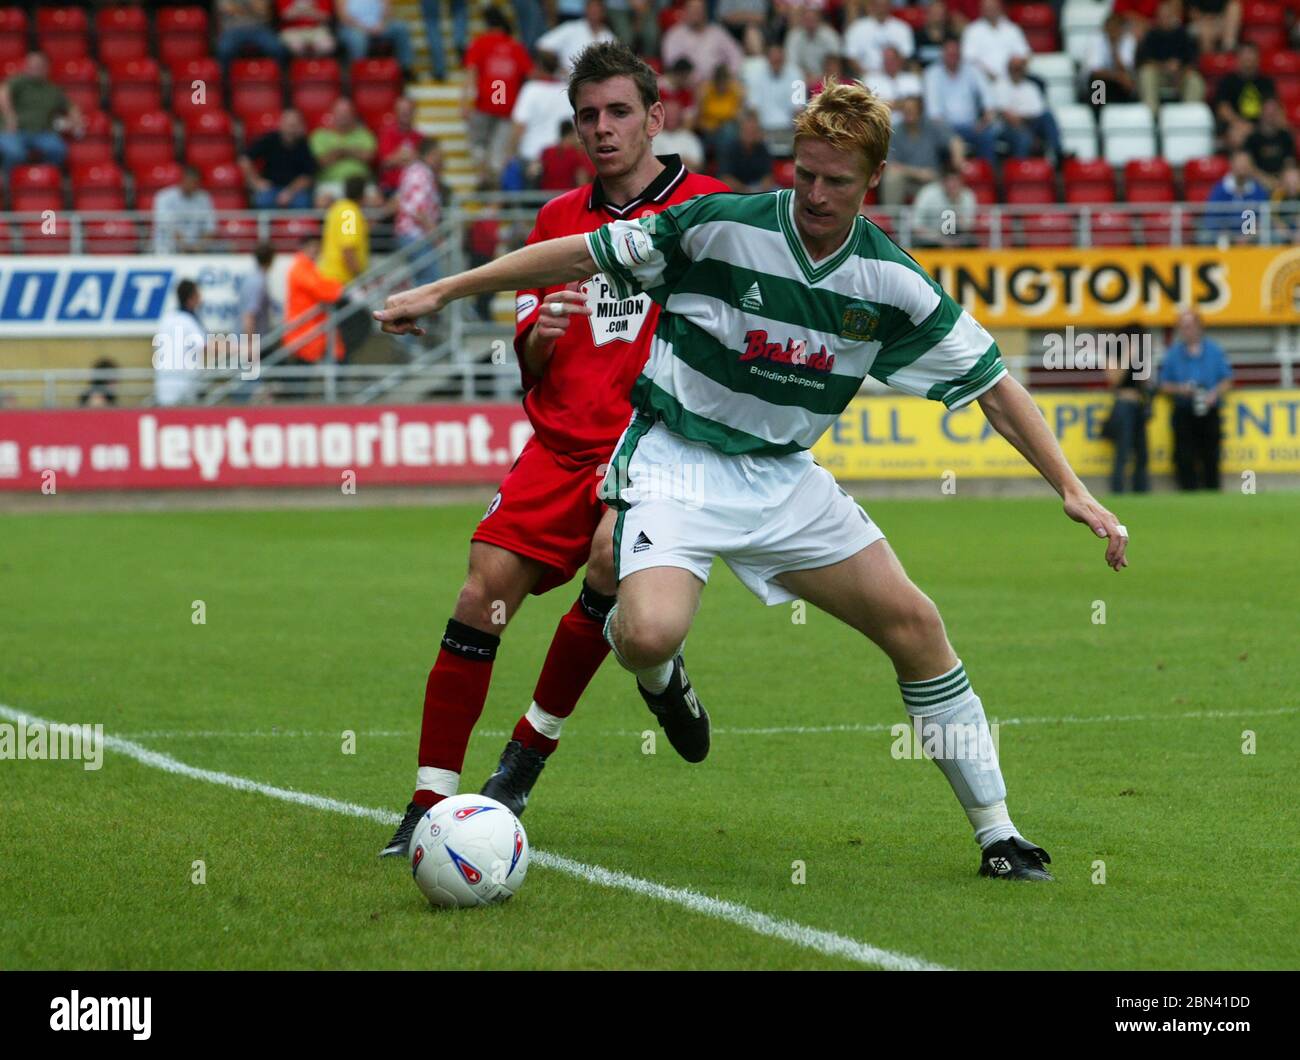 LONDON, UK. AUGUST 23: Nick Crittenden of Yeovil Town  during League Division 3 between Leyton Orient and Yeovil Town at Matchroom stadium, London on Stock Photo